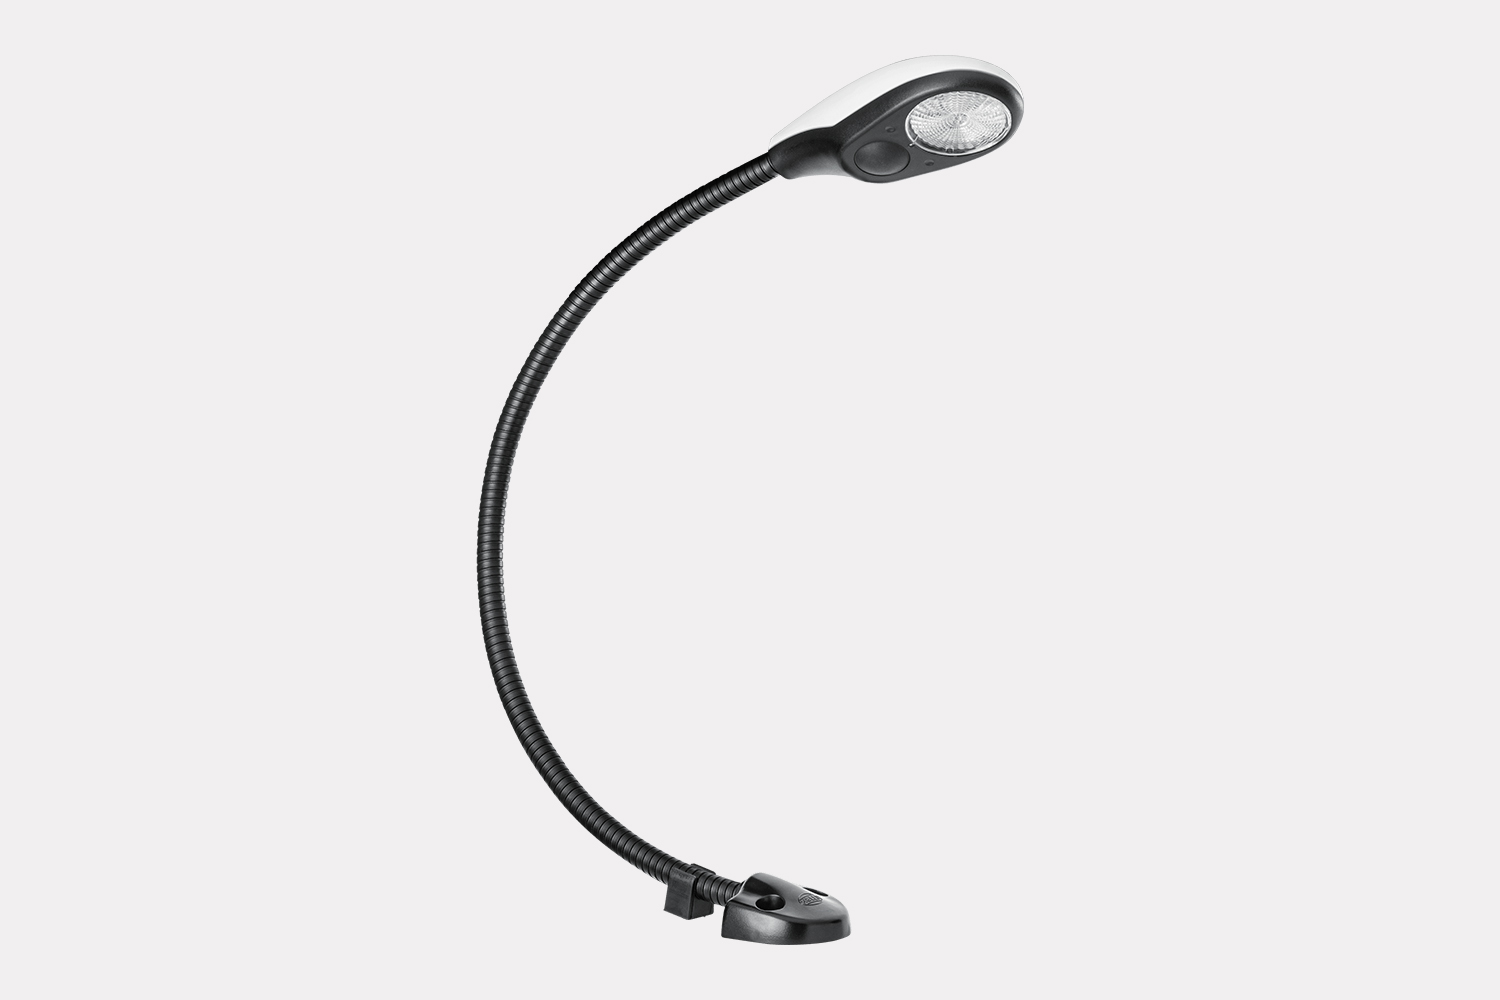 LED Reading lamp 346 720 from Hella offered by Patlon in Canada